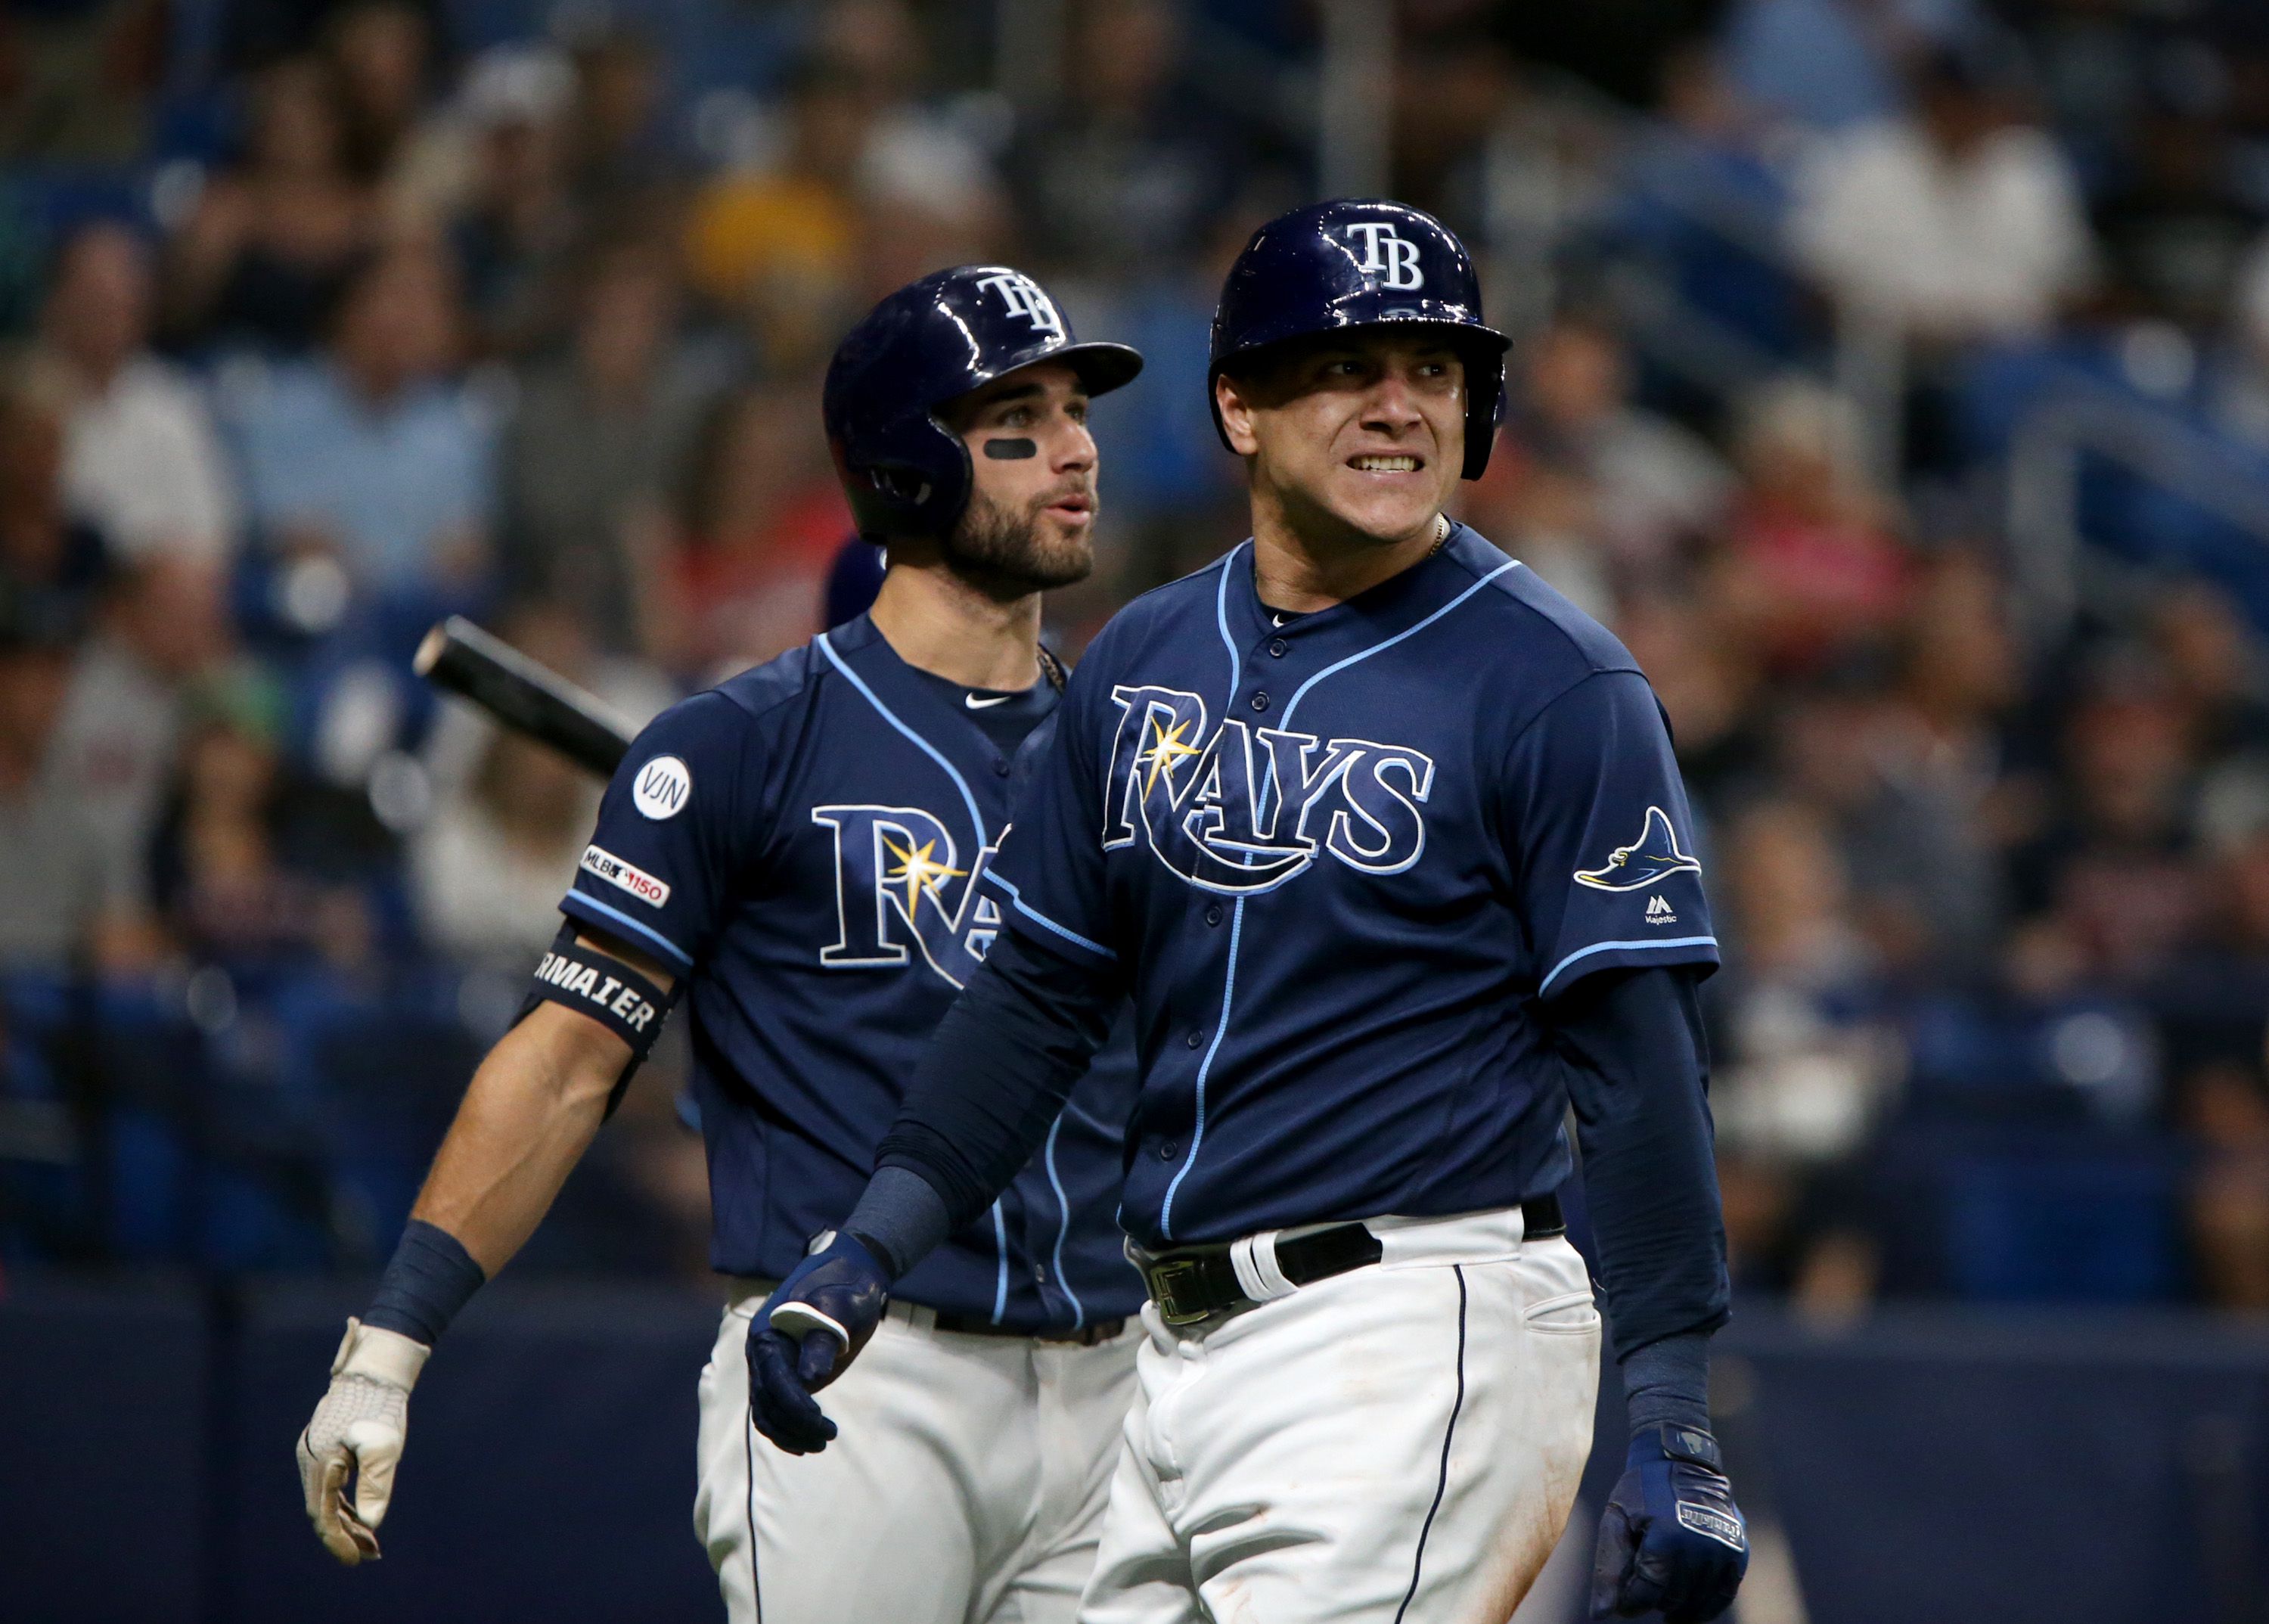 Kevin Kiermaier is Rays nominee for MLB Roberto Clemente award